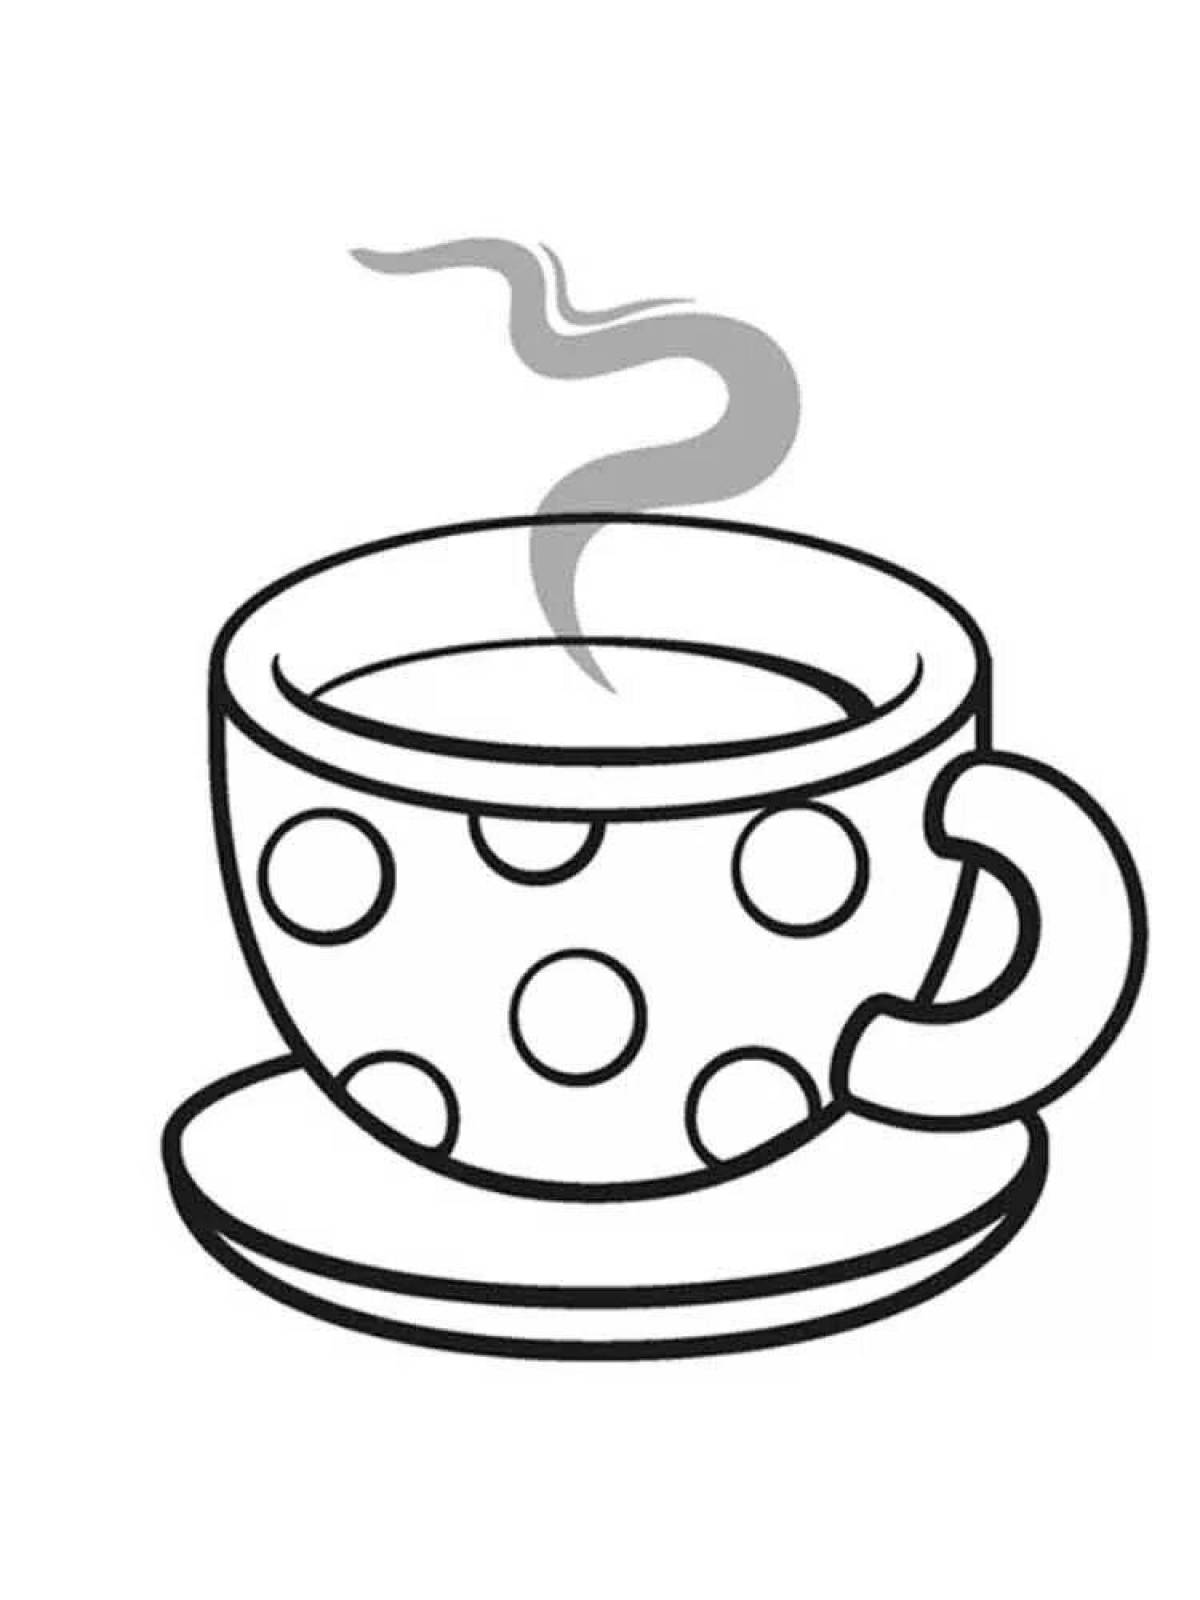 Awesome cup of tea coloring page